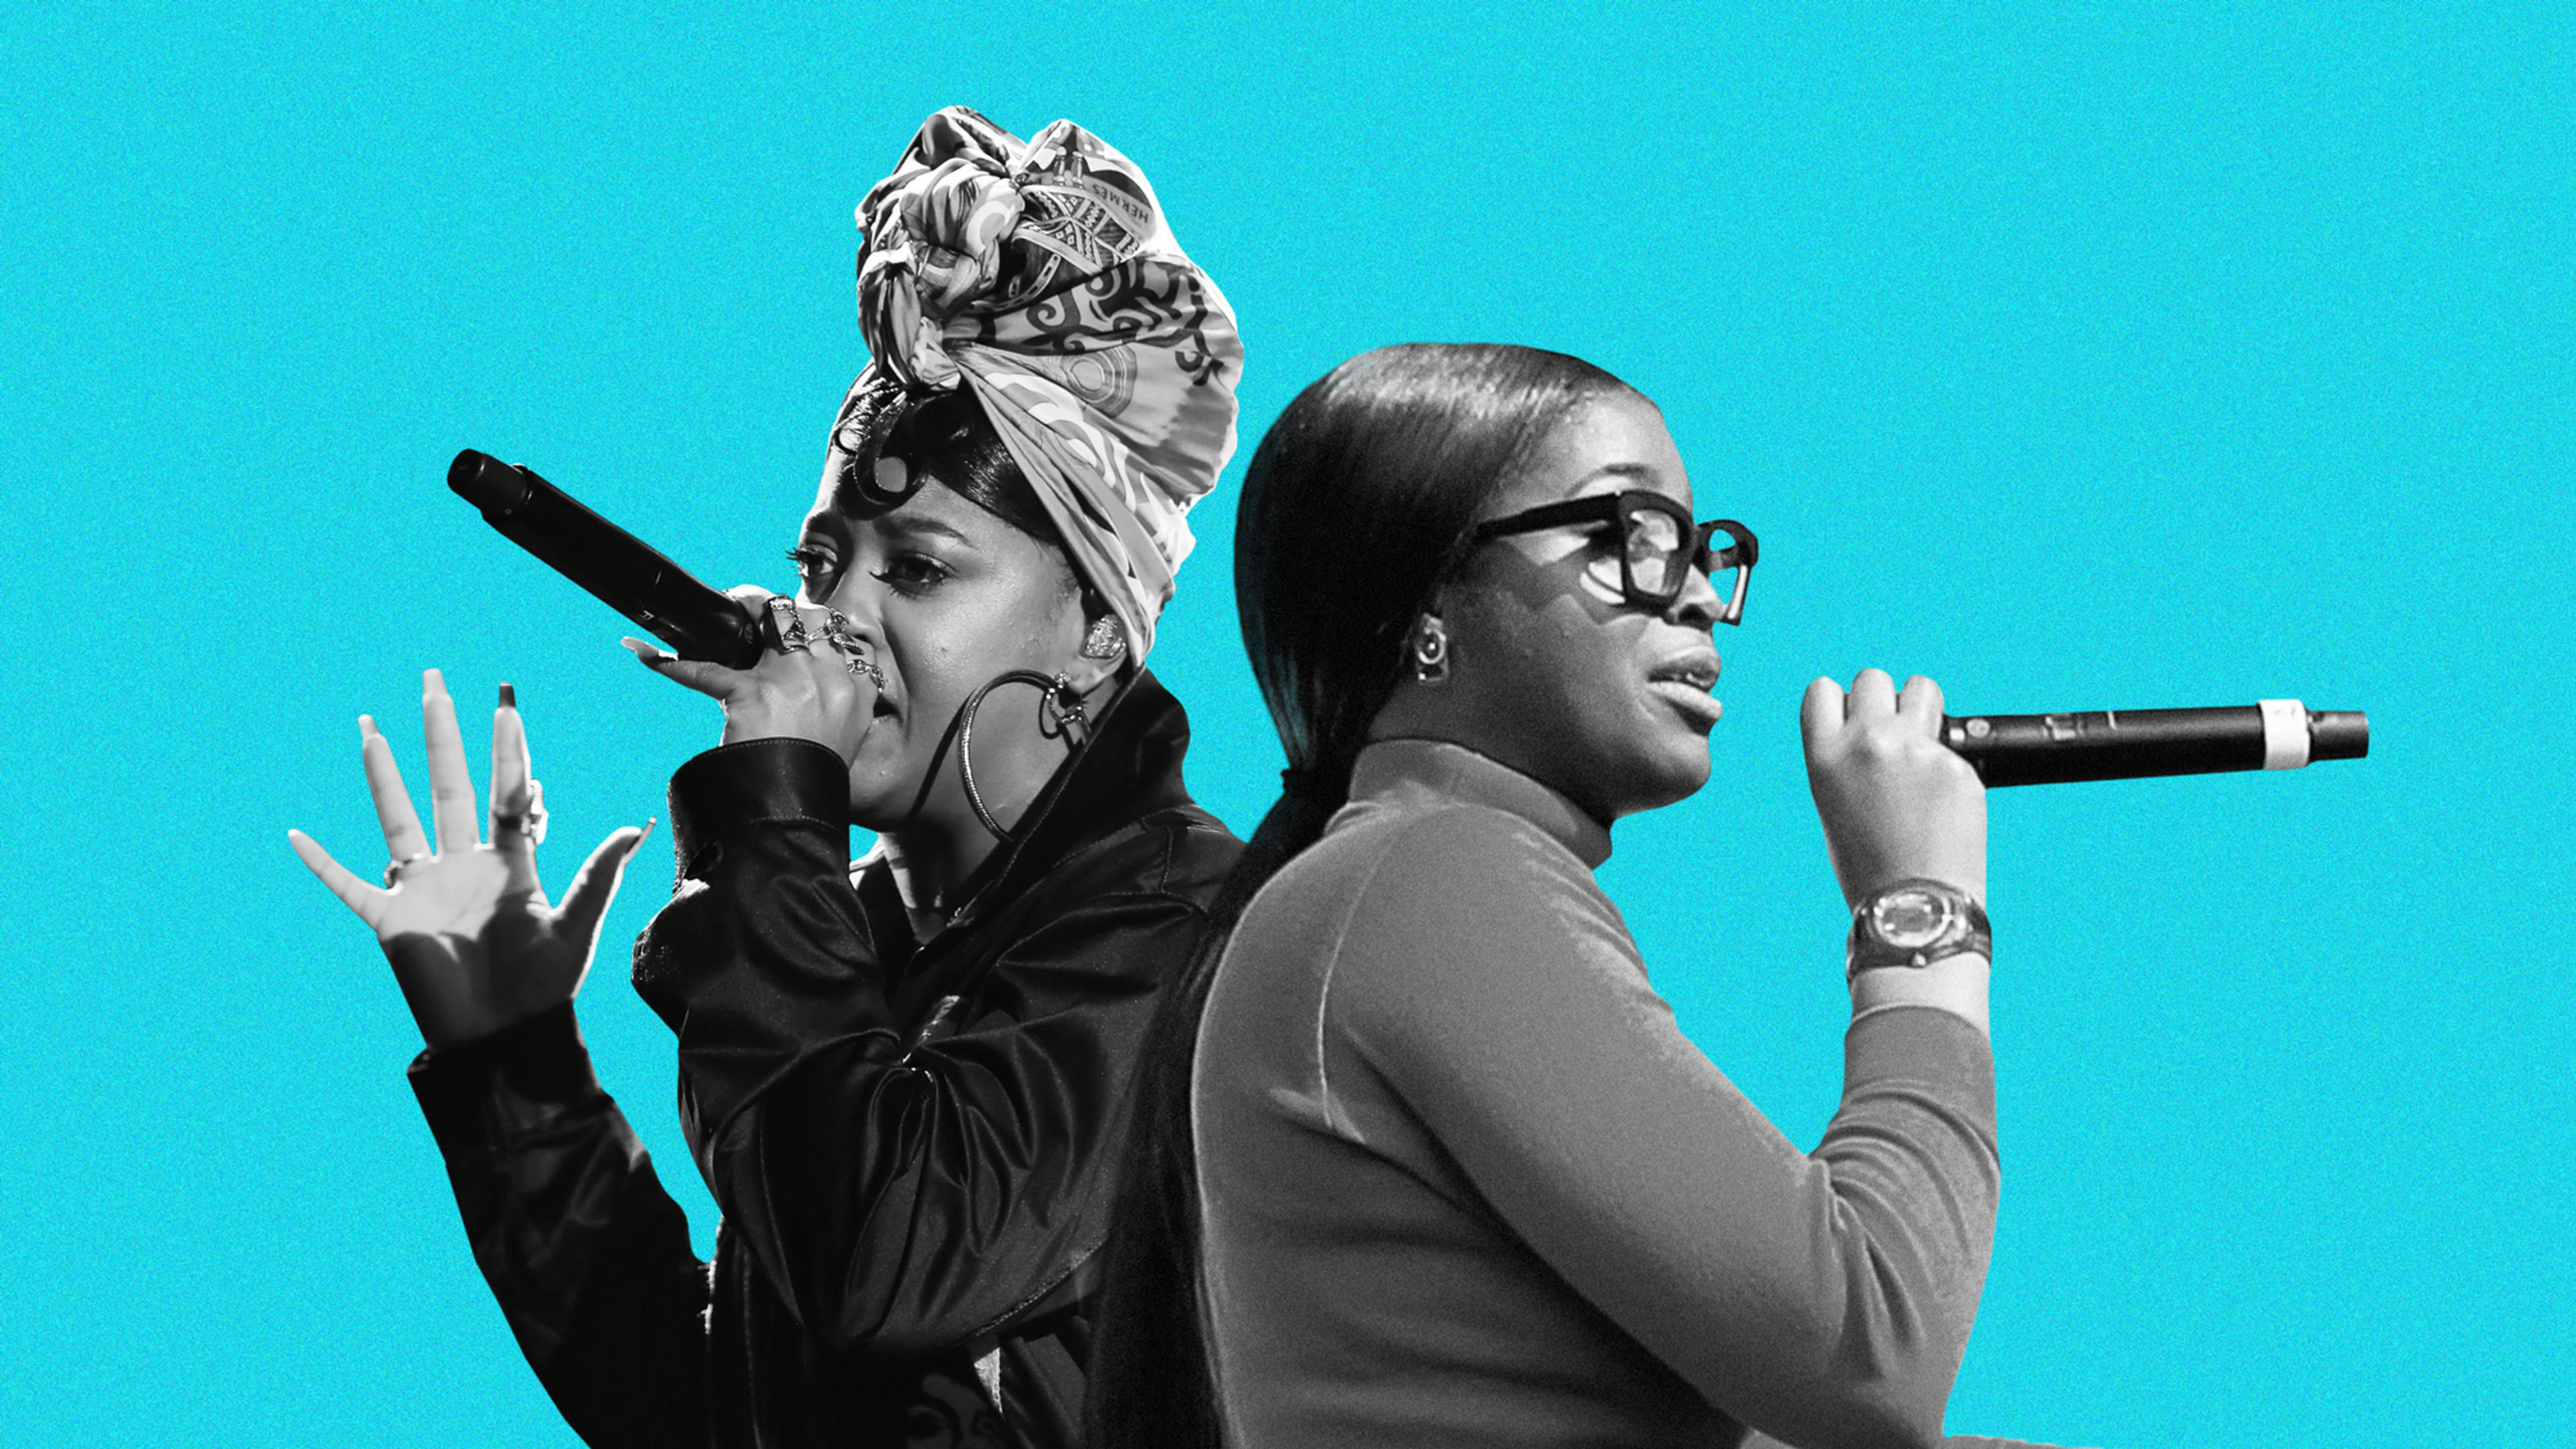 The Grammy nominations are in, but women rappers were shut out